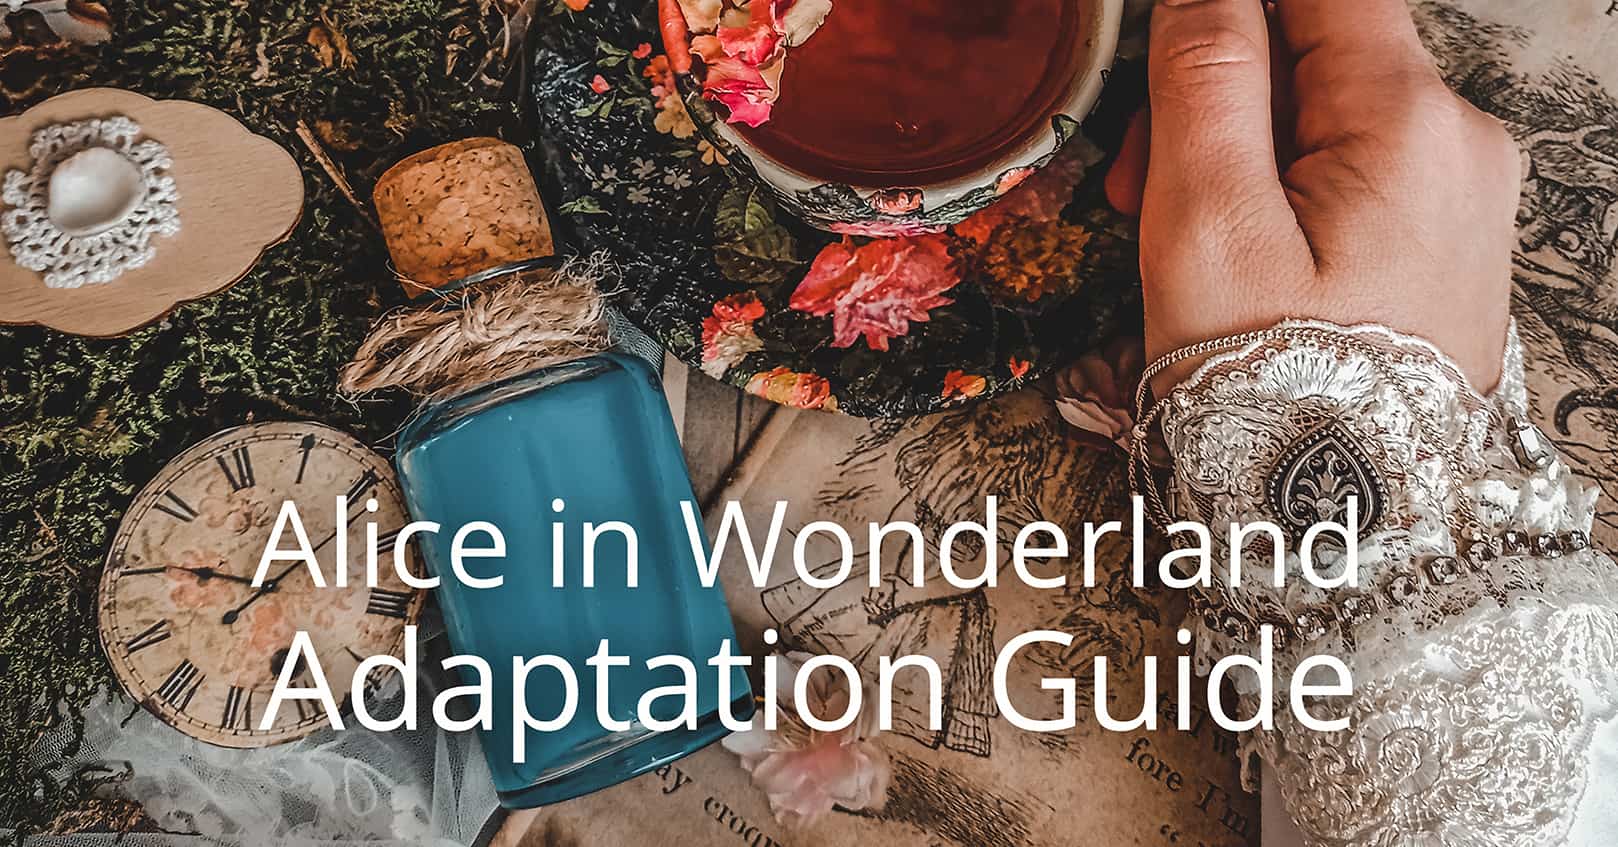 alice in wonderland adaptation guide - Movie, Books, Music, Play, and Video Games